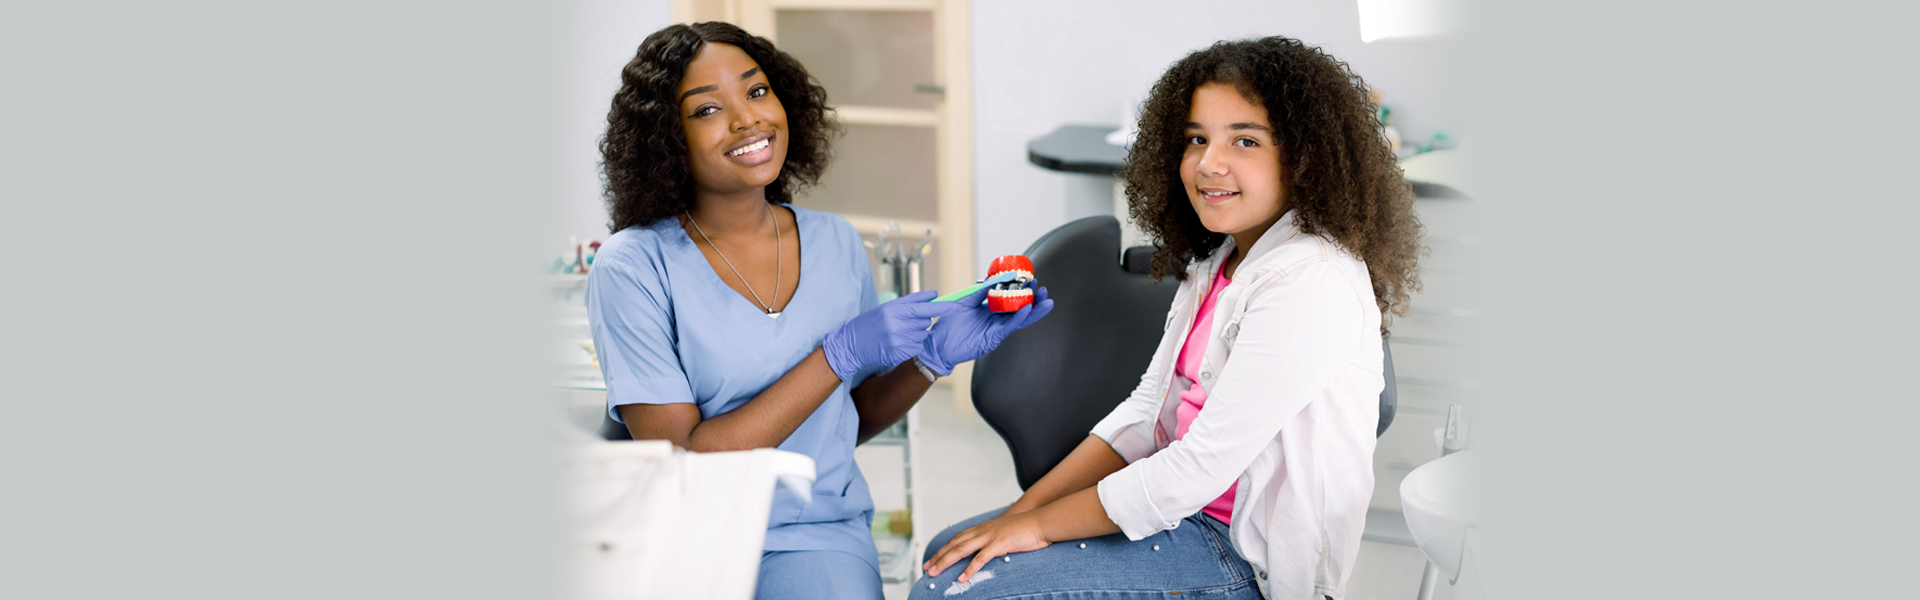 Looking for a Family Dentist? Here is What You Should Know